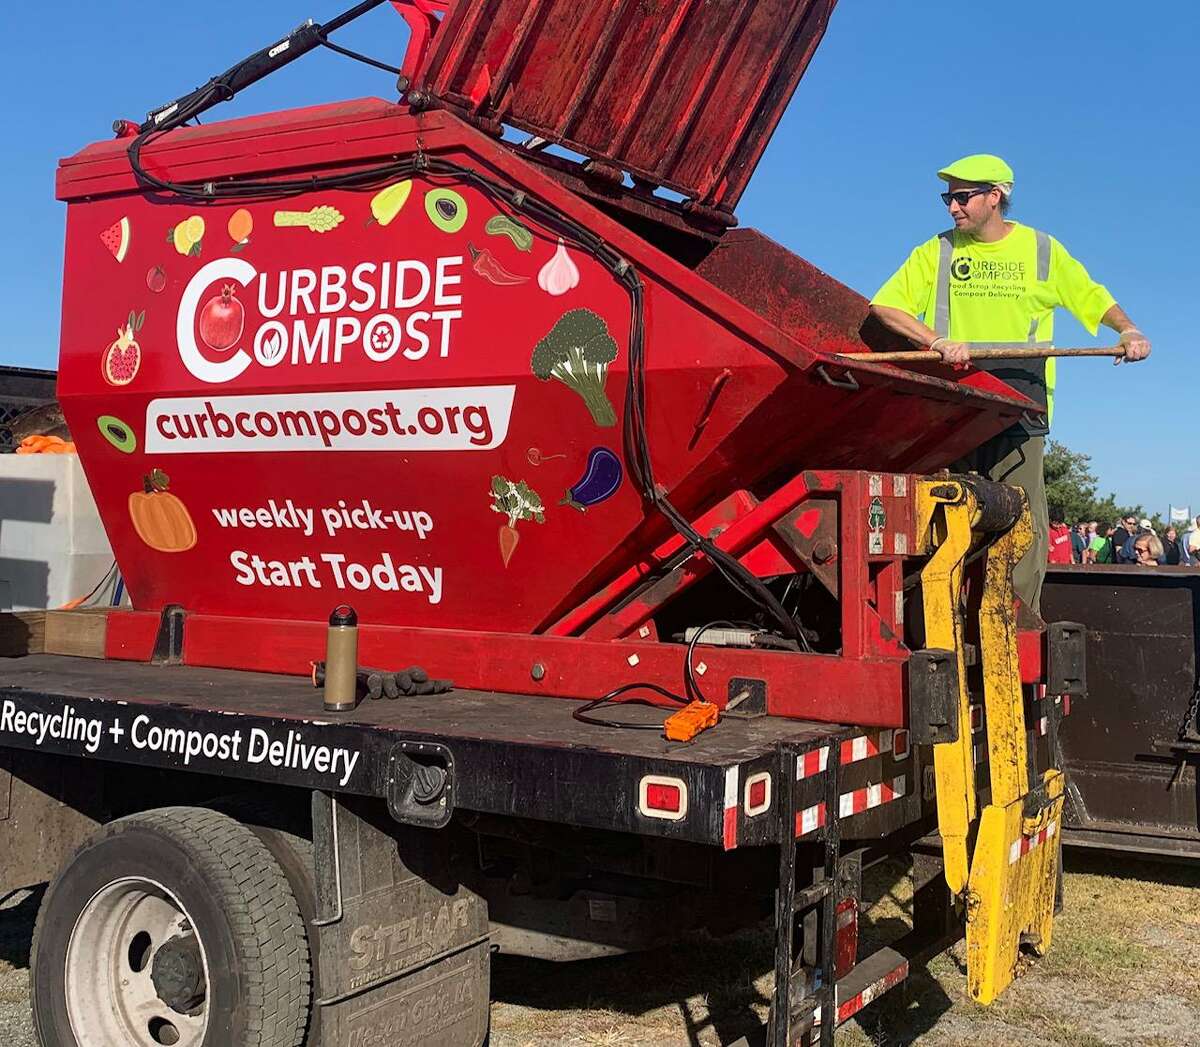 Curbside Compost, based in Ridgefield, offers its customers a way to compost food scraps without the mess